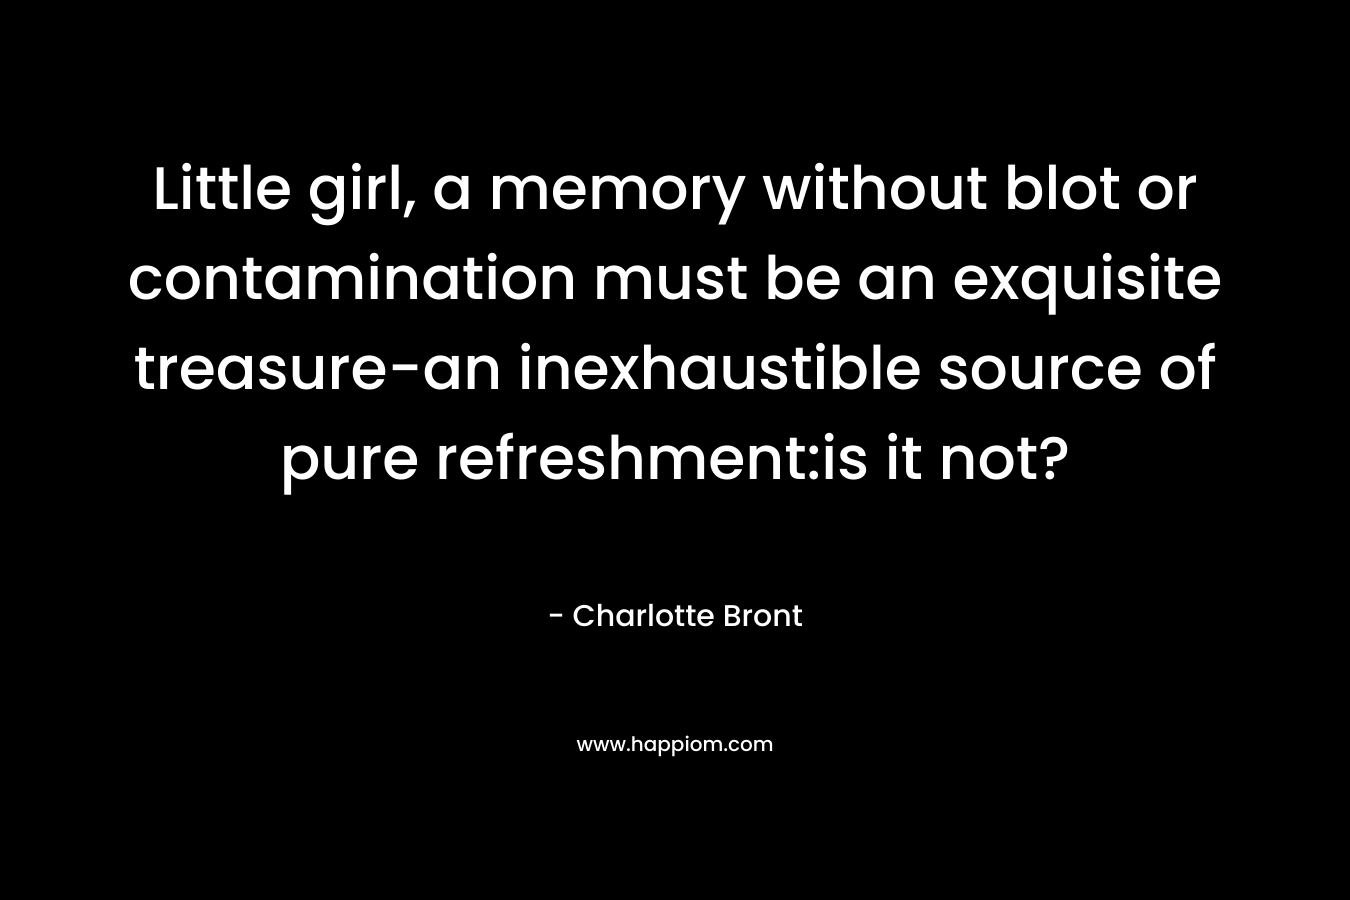 Little girl, a memory without blot or contamination must be an exquisite treasure-an inexhaustible source of pure refreshment:is it not? – Charlotte Bront